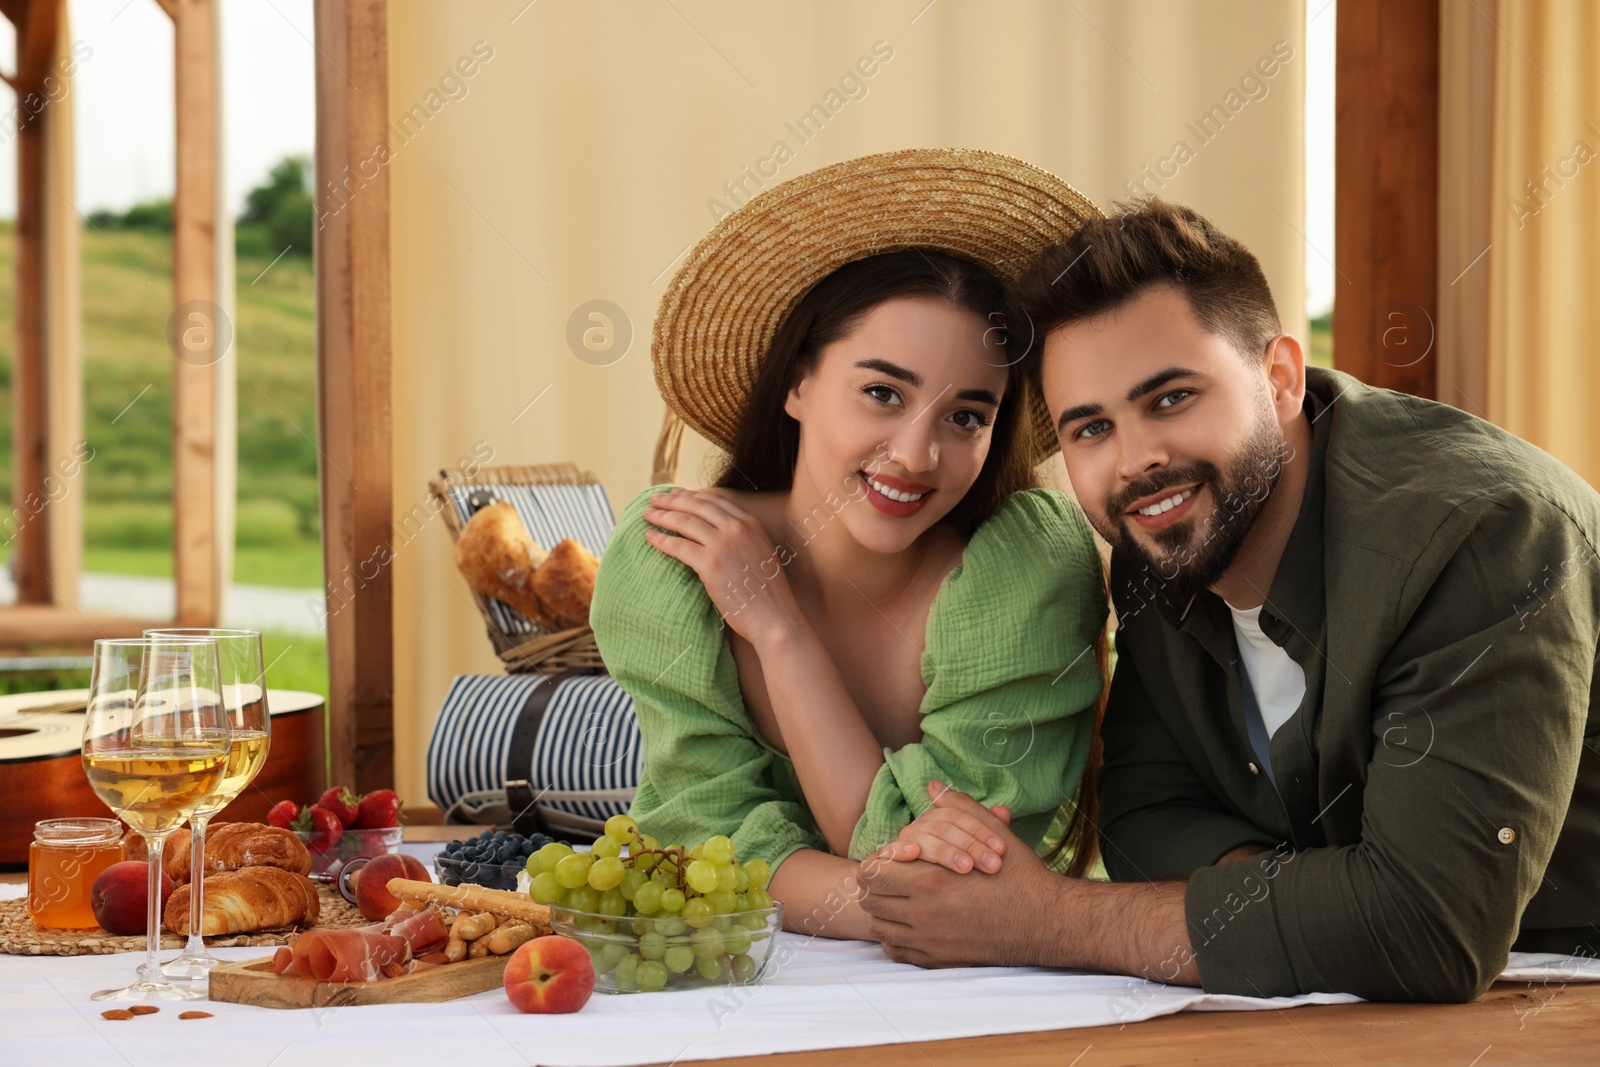 Photo of Romantic date. Beautiful couple spending time together during picnic in wooden gazebo